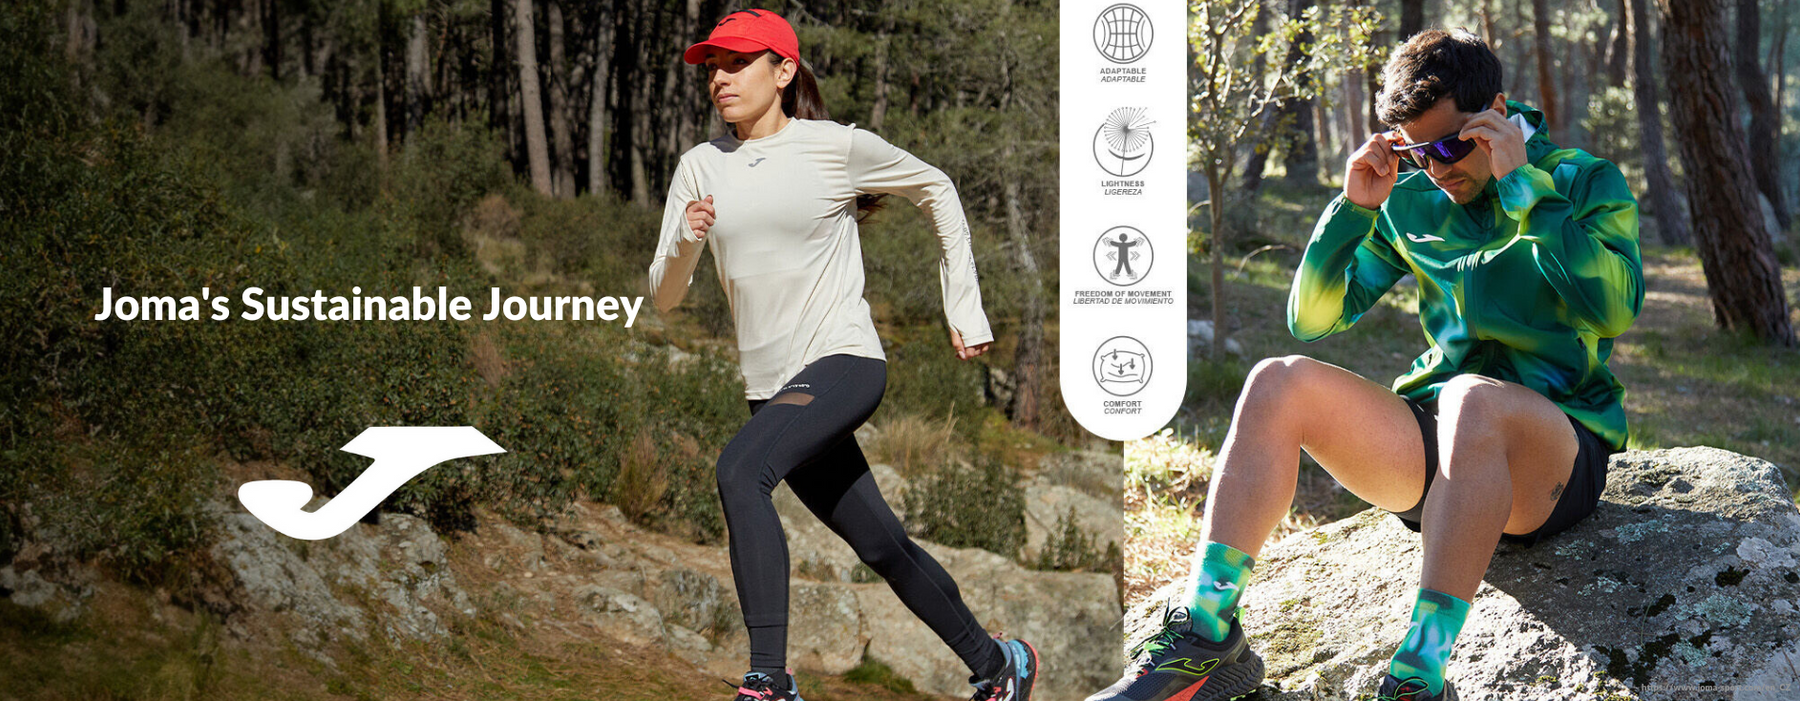 Joma's Sustainable Journey: Pioneering Eco-Friendly Sportswear and Environmental Impact Reduction